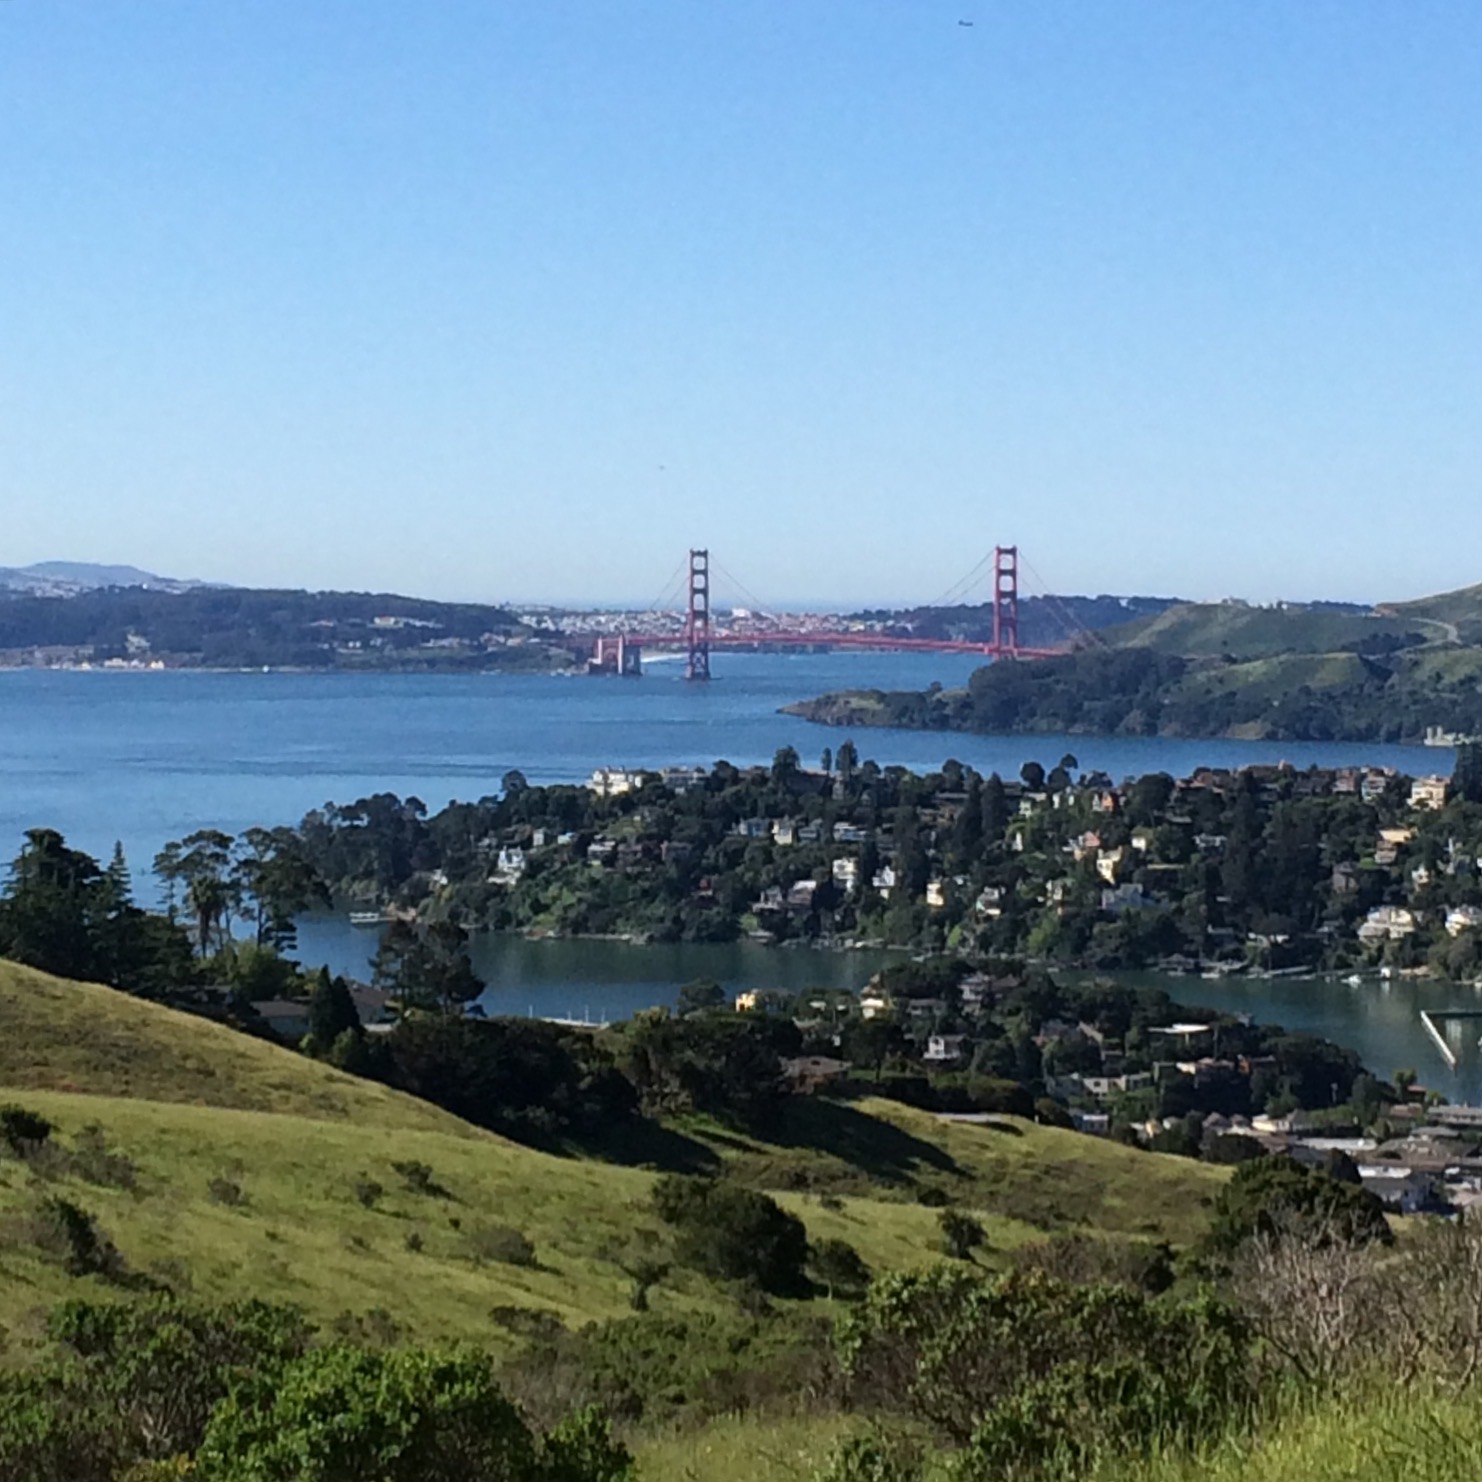  Head up to Old St. Hilary’s Open Space Preserve for spectacular only-in-Tiburon views of the San Francisco Bay and the Golden Gate Bridge. 